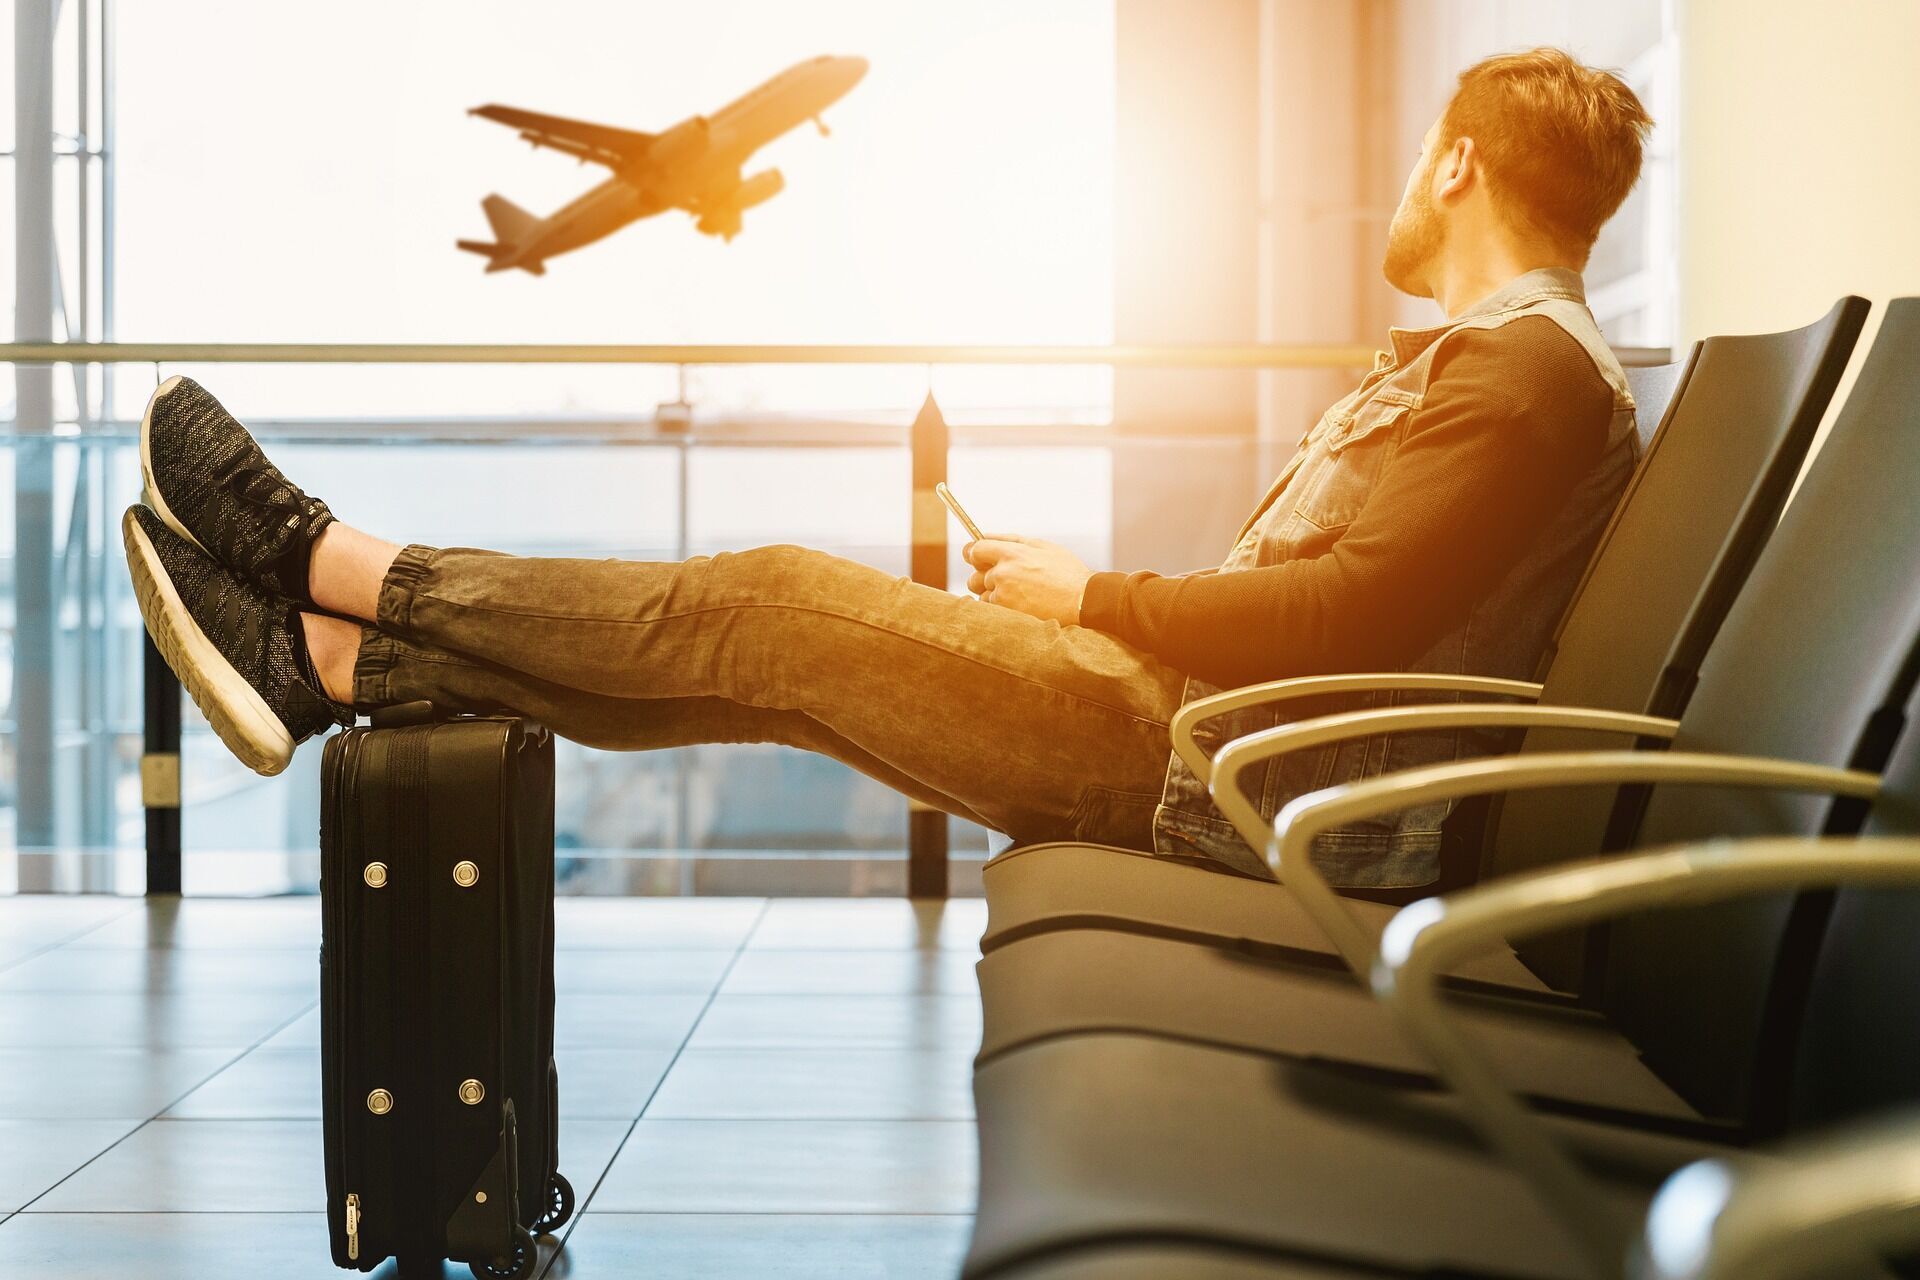 8 travel tips to help you avoid excess baggage fees